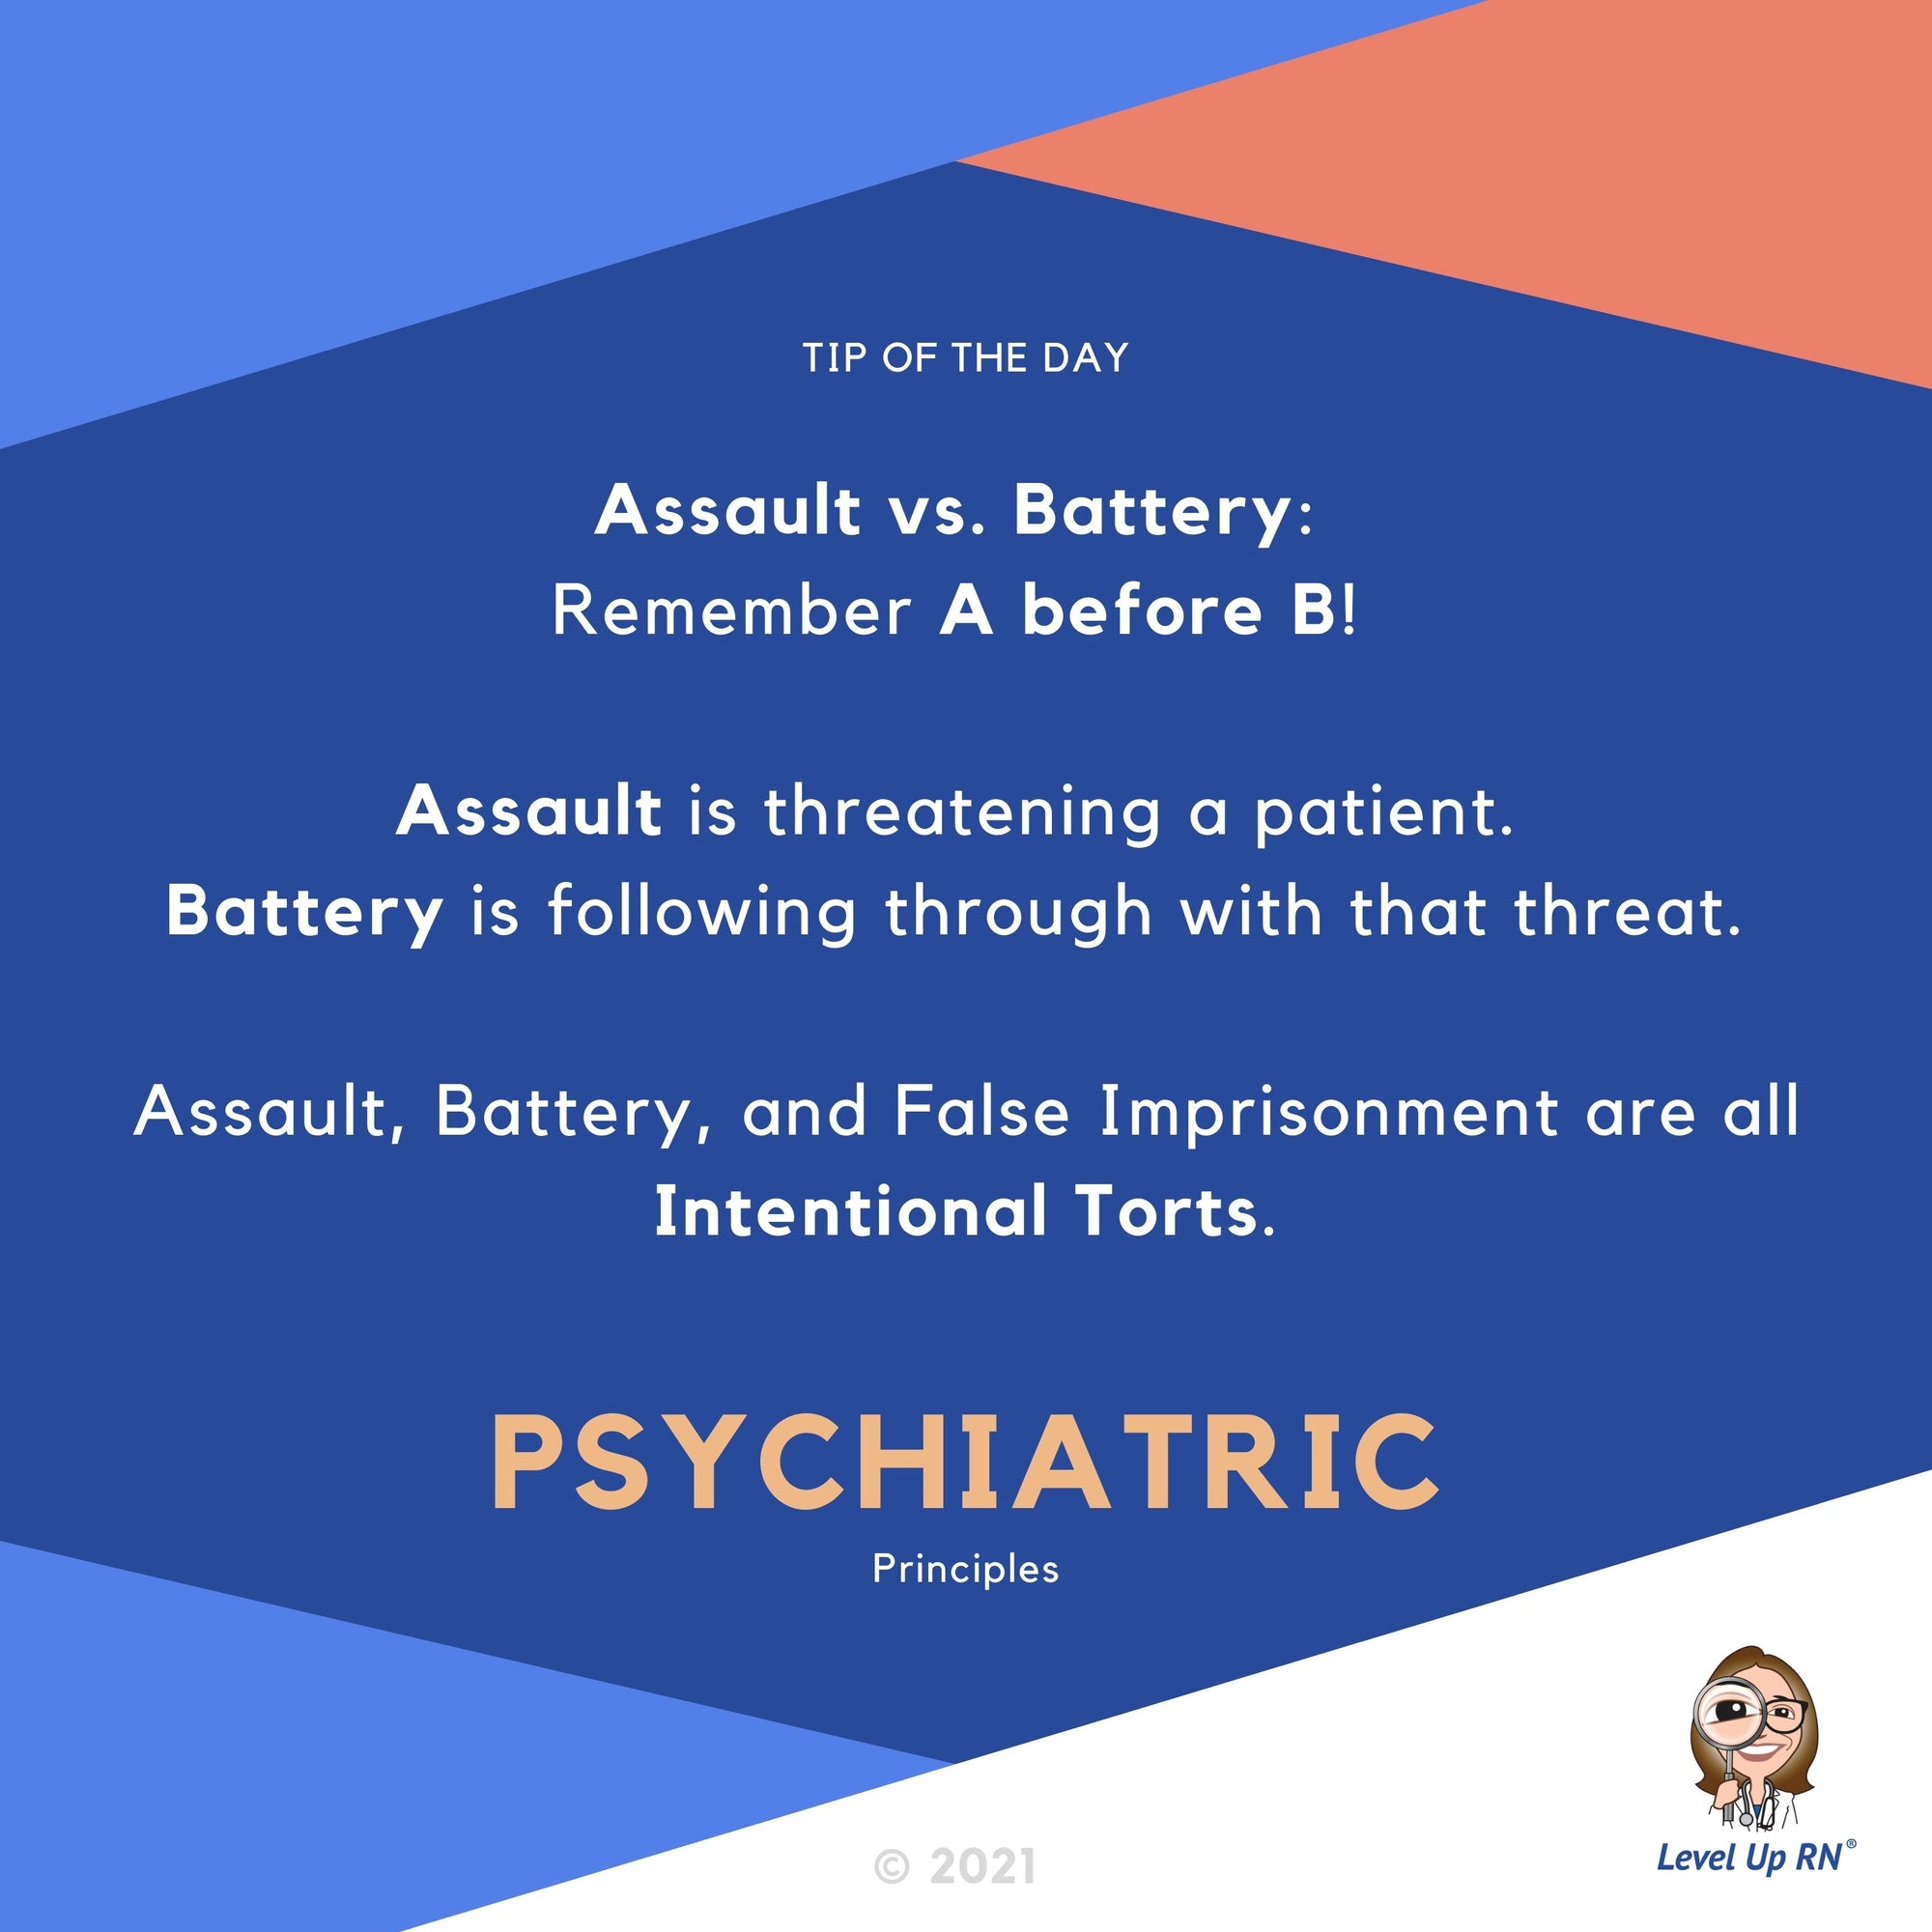 Assault vs. Battery: Remember A before B! Assault is threatening a patient, Battery is following through with that threat. 